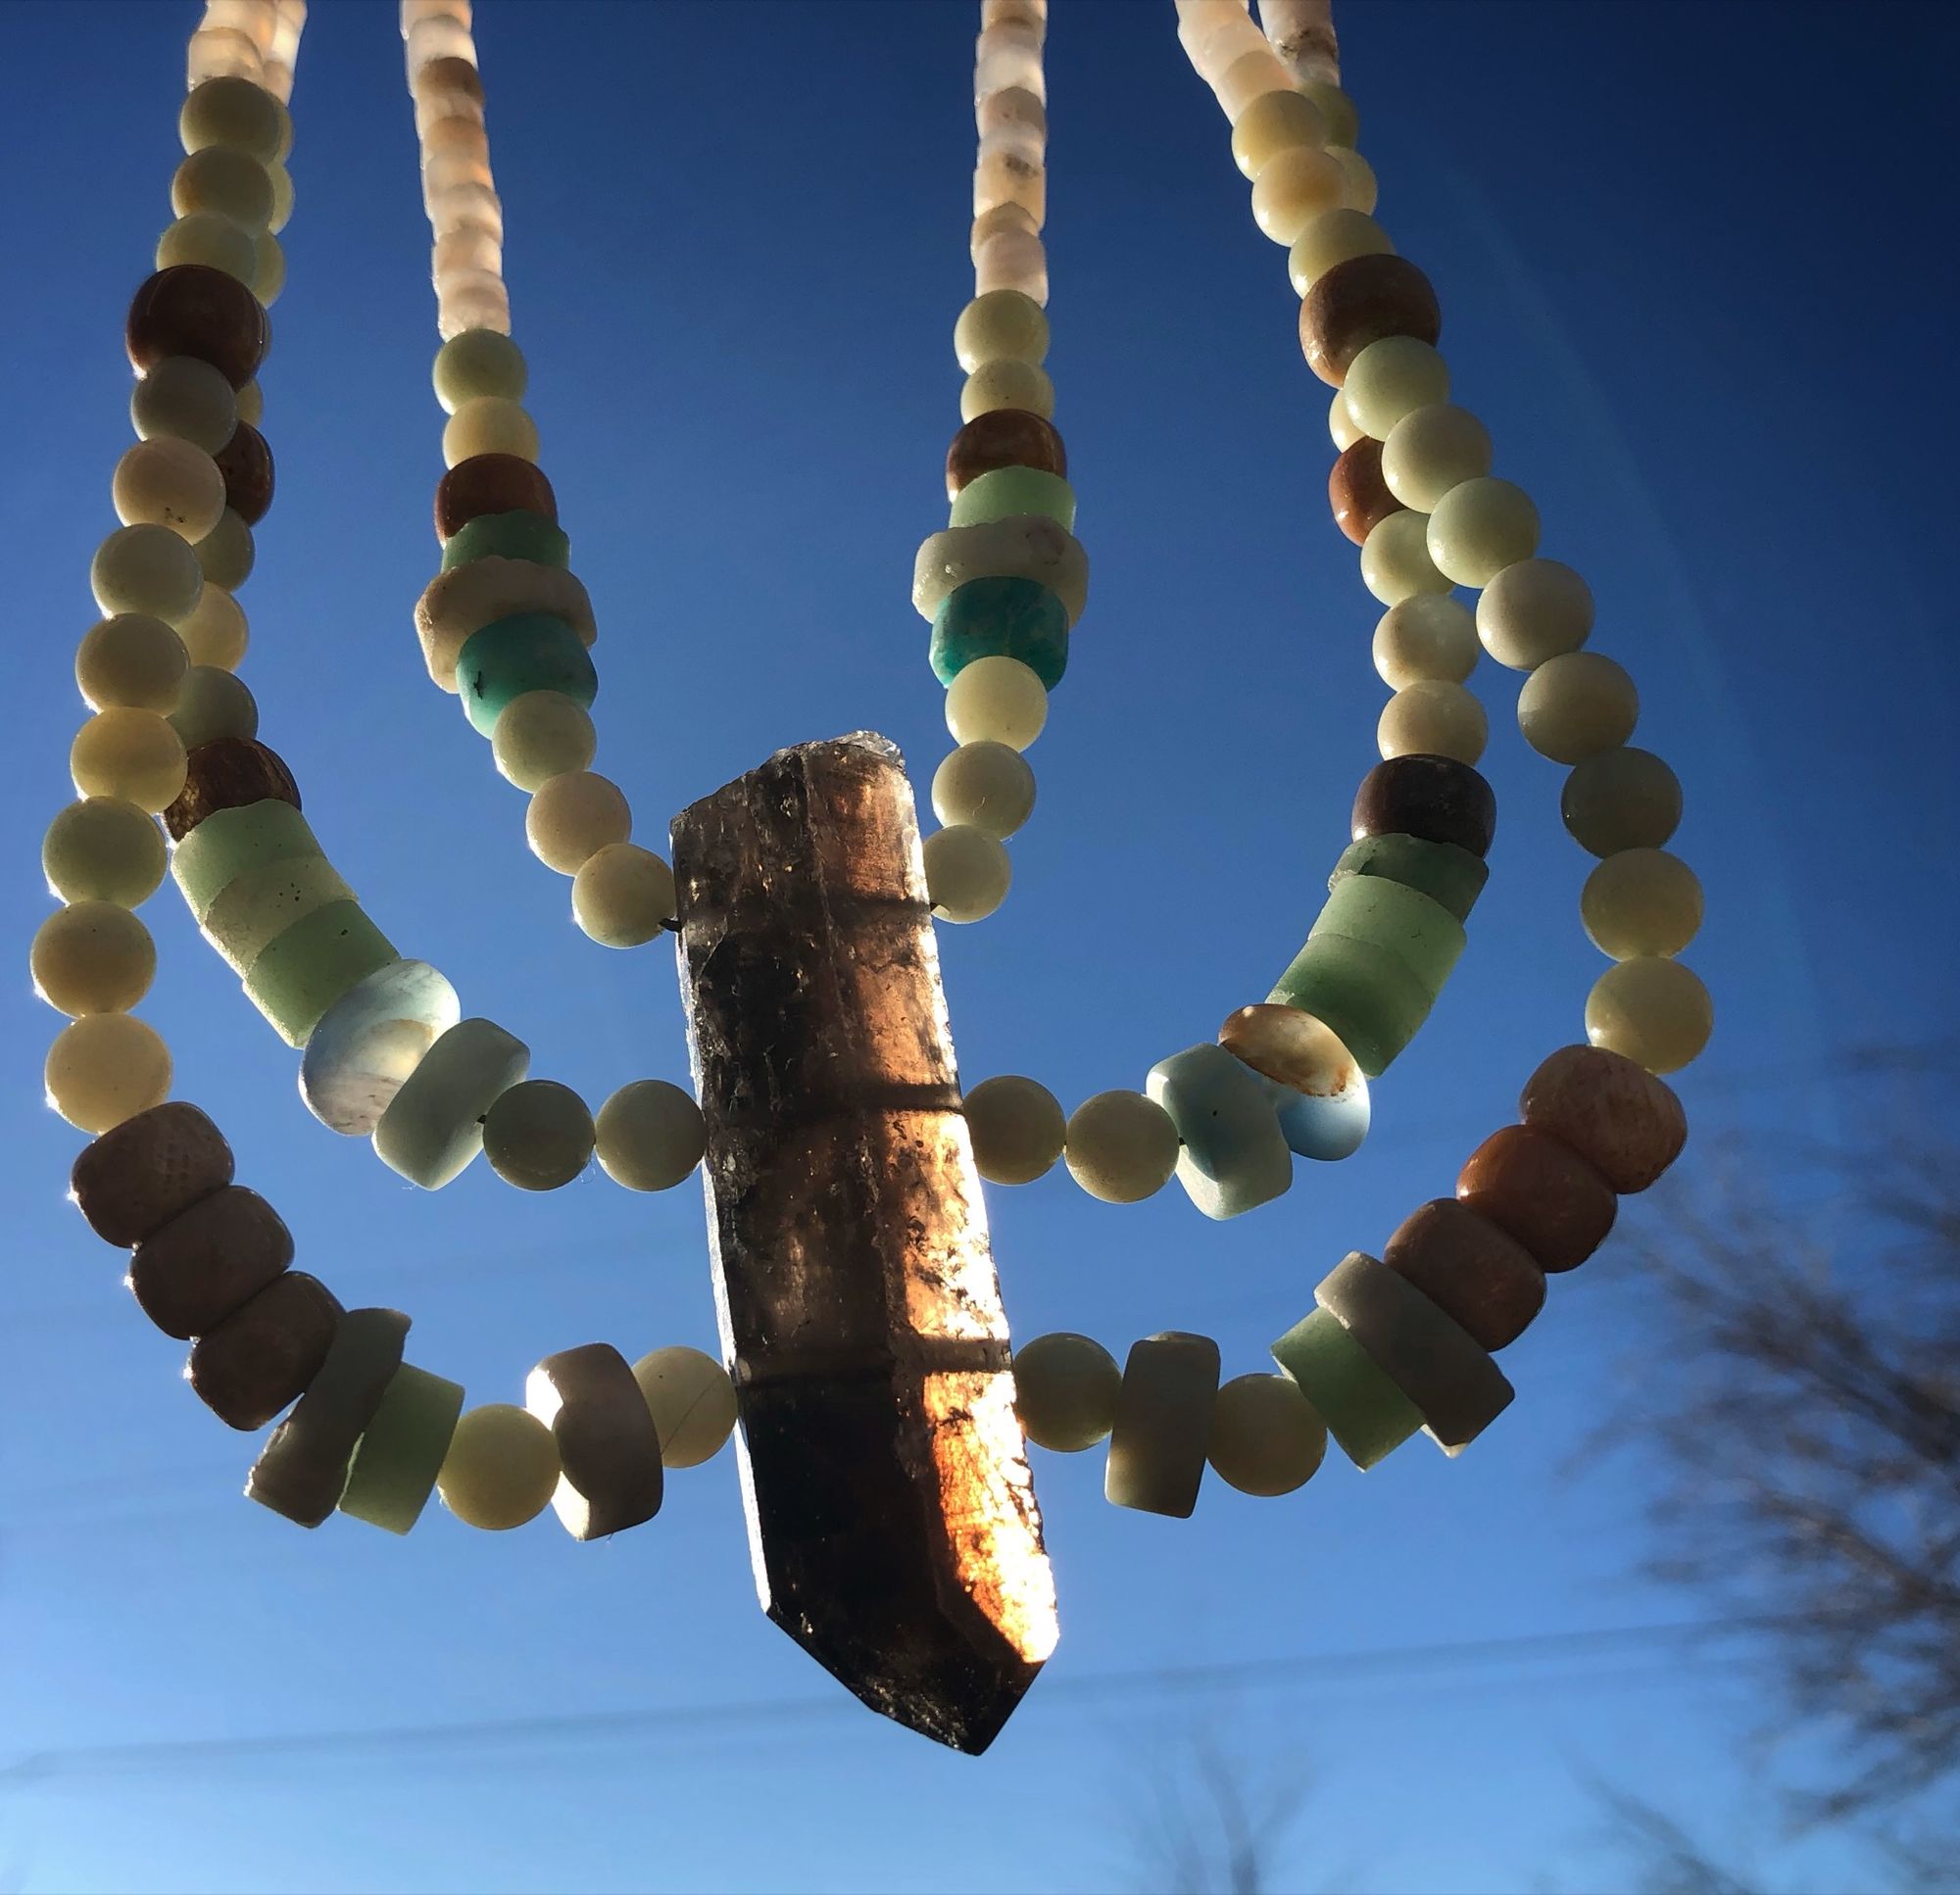 three strand necklace made with a grey crystal point and blue-green beads being held up against a blue sky